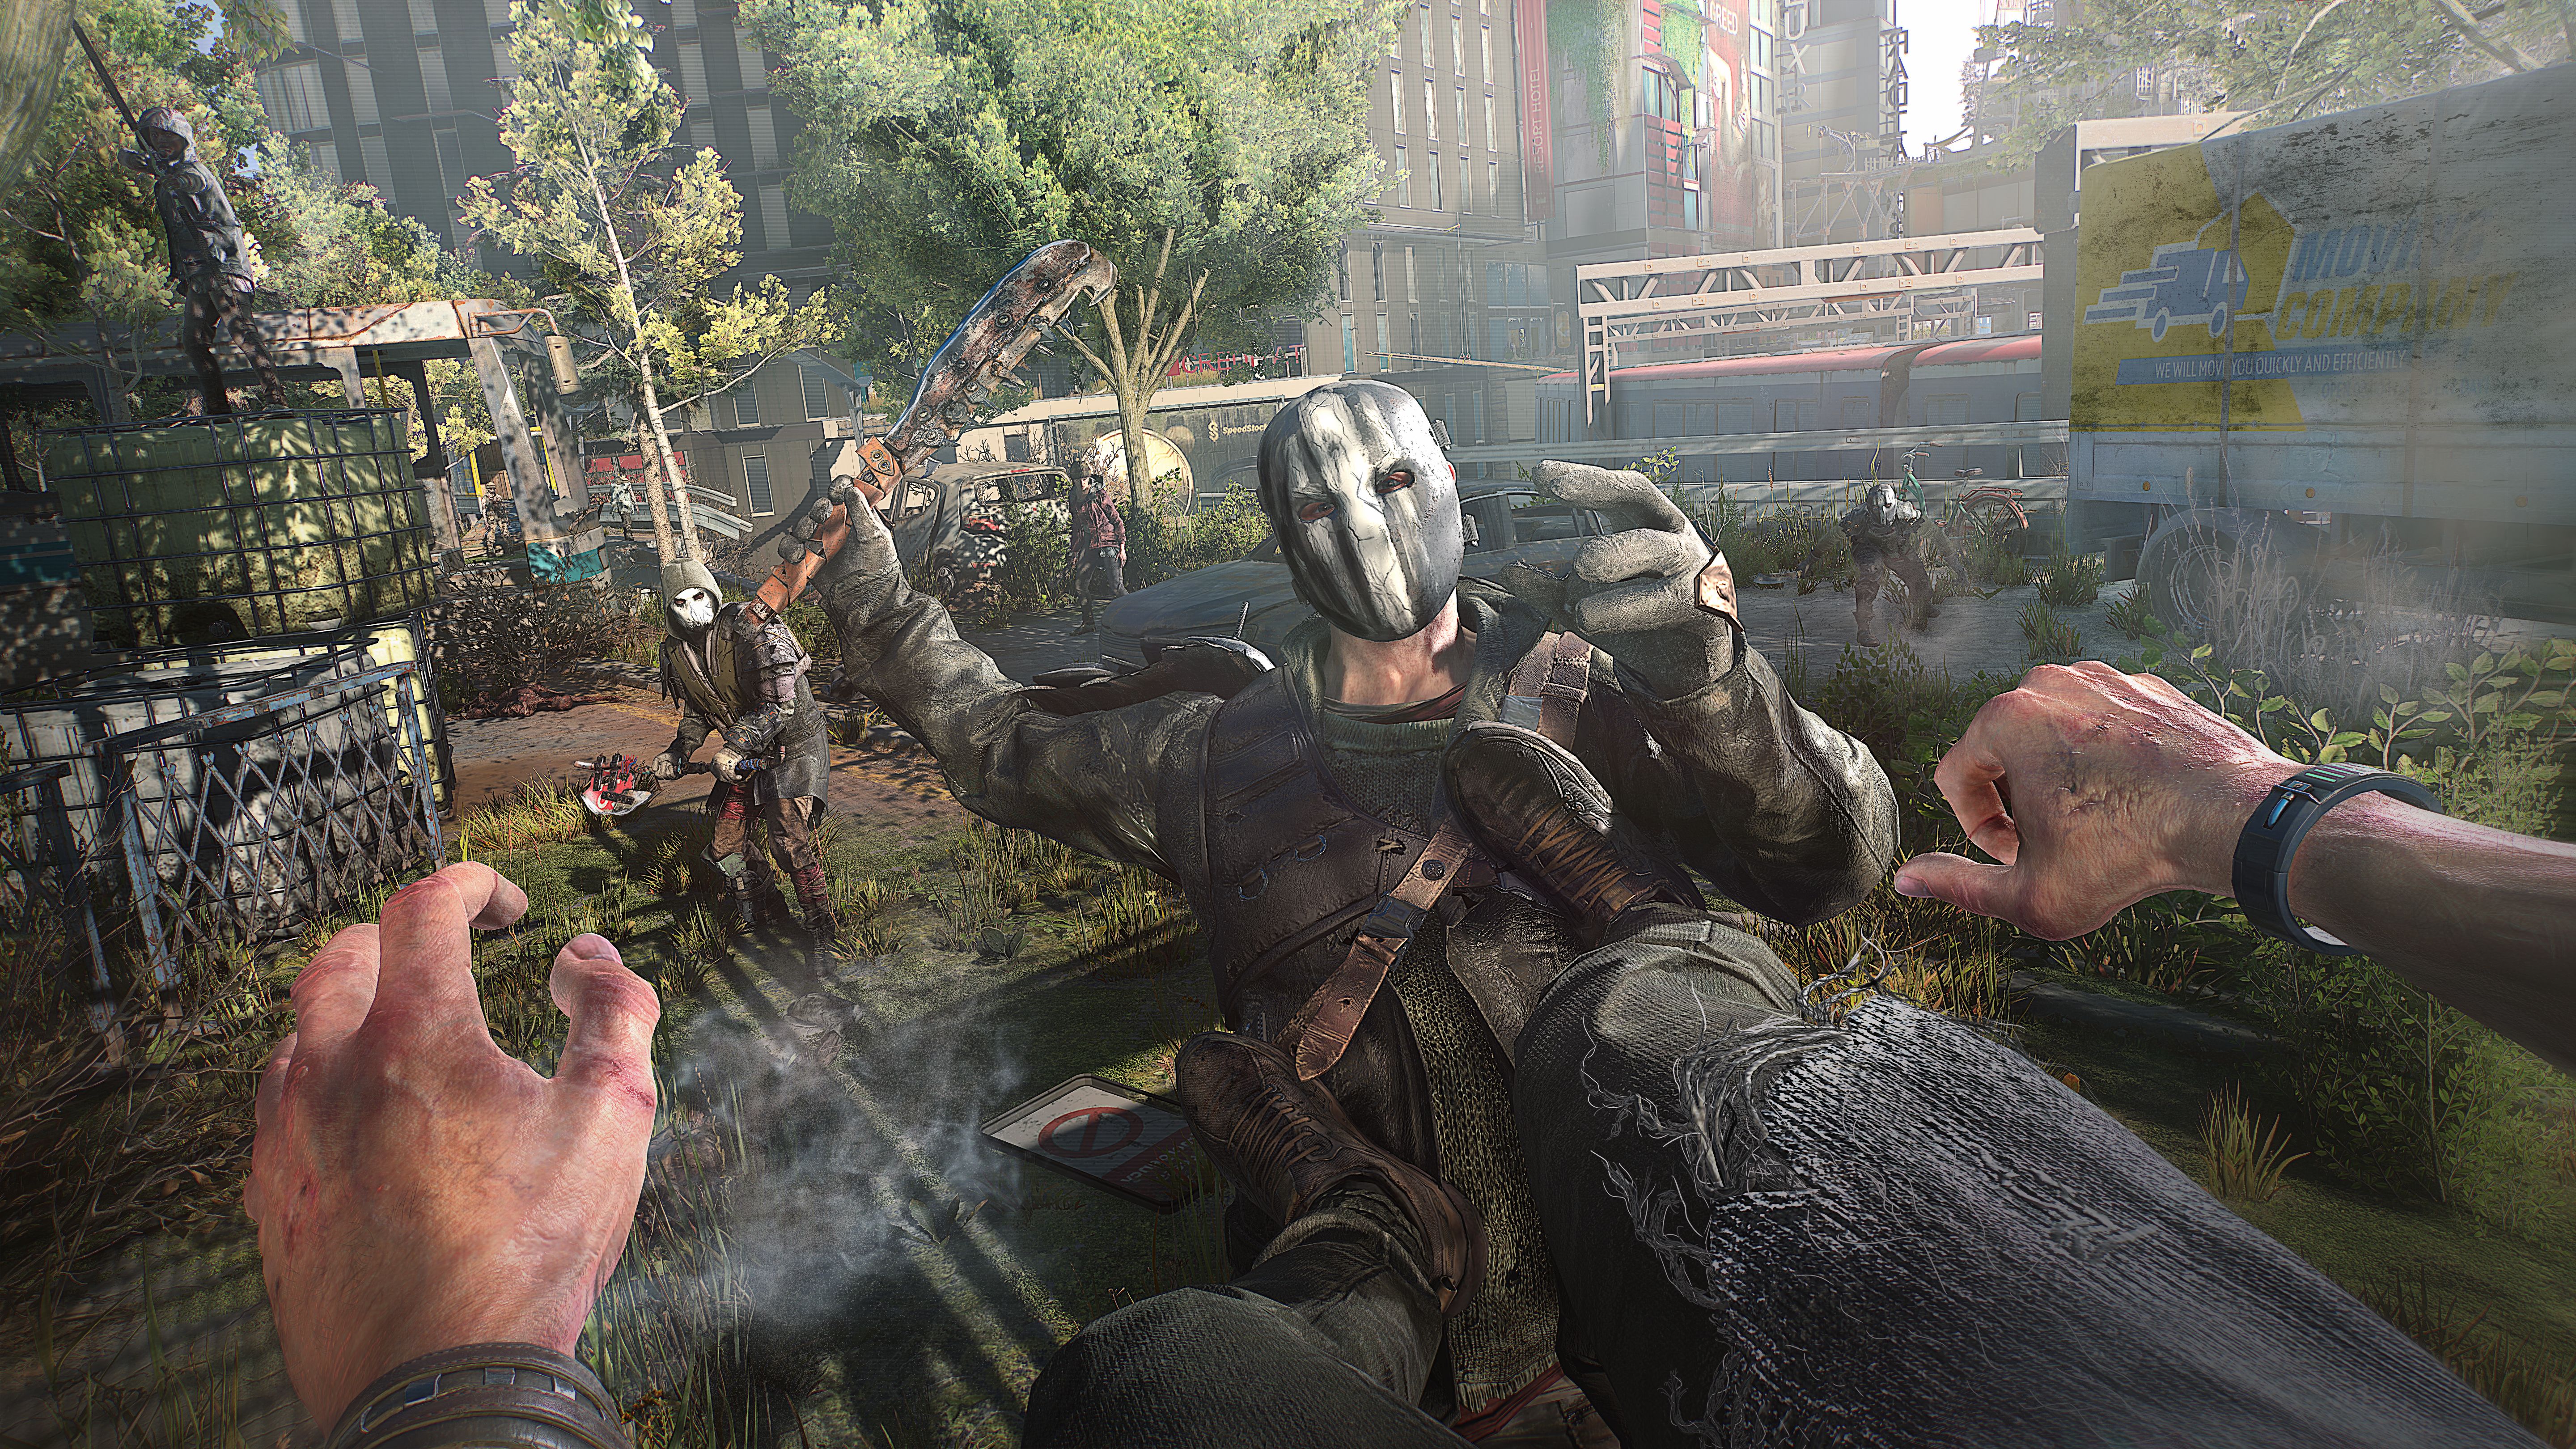 A promotional screenshot from a preview of Dying Light 2, showing the protagonist's first person view as they double-kick a bandit in the chest